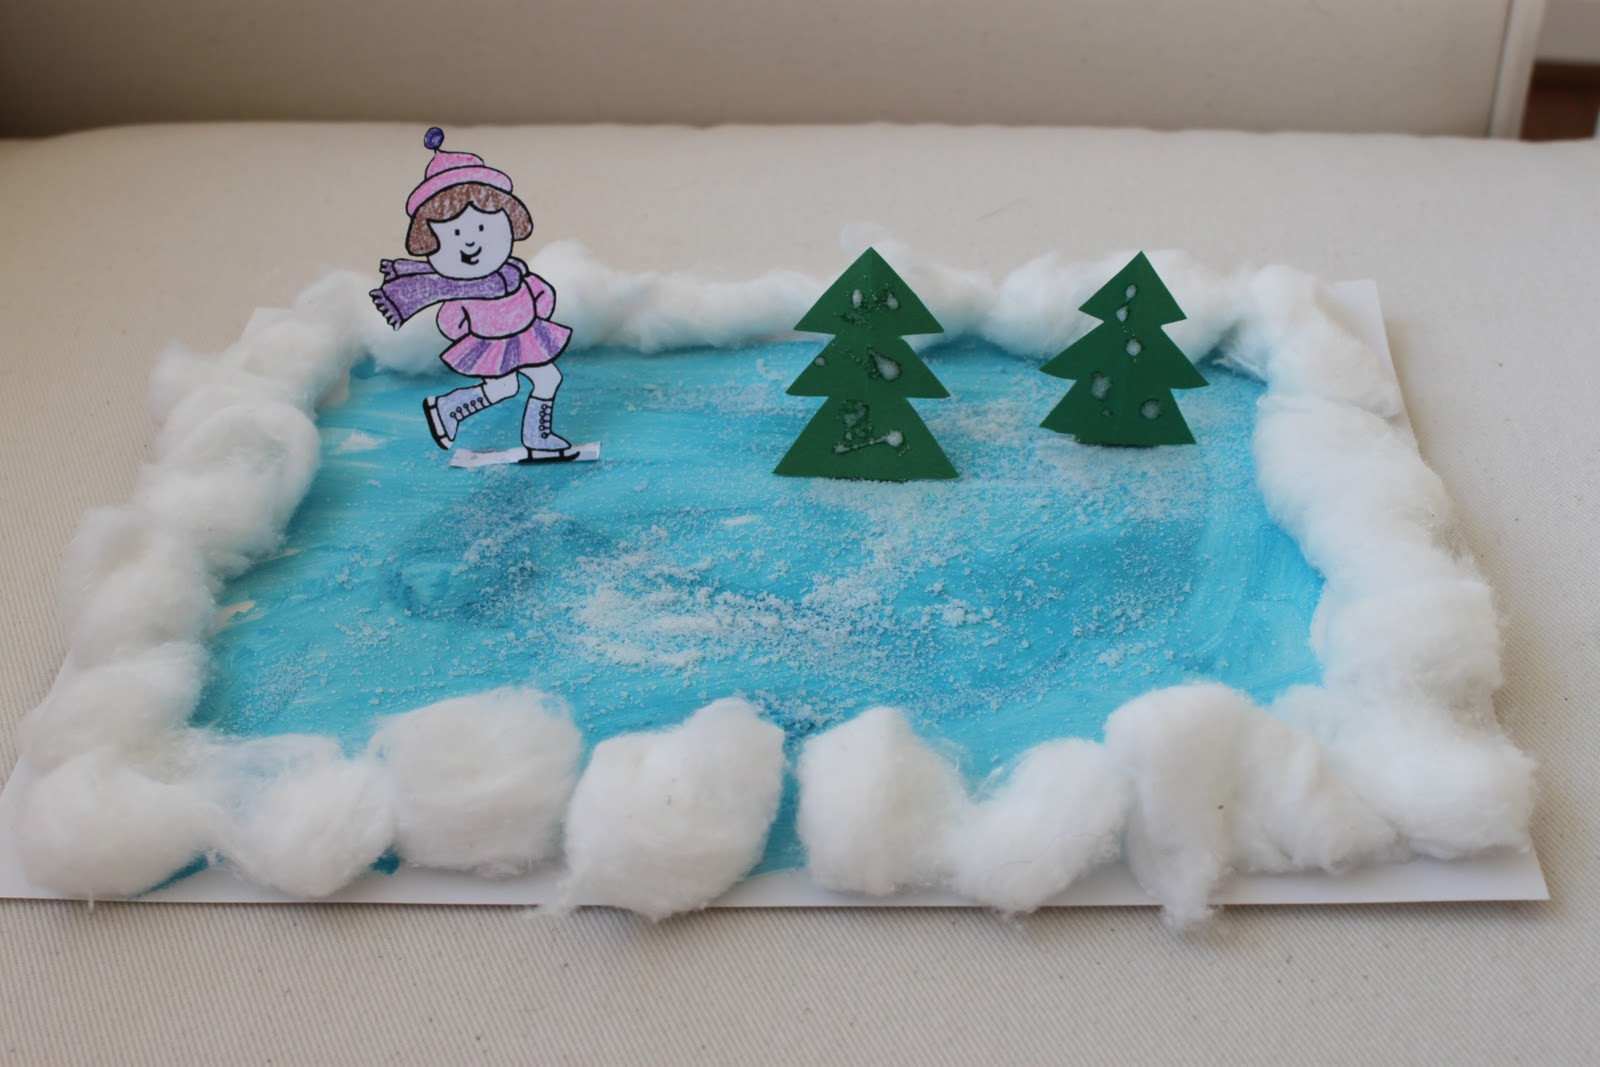 Winter Crafts Ideas For Preschoolers
 Playing House Fun Winter Crafts